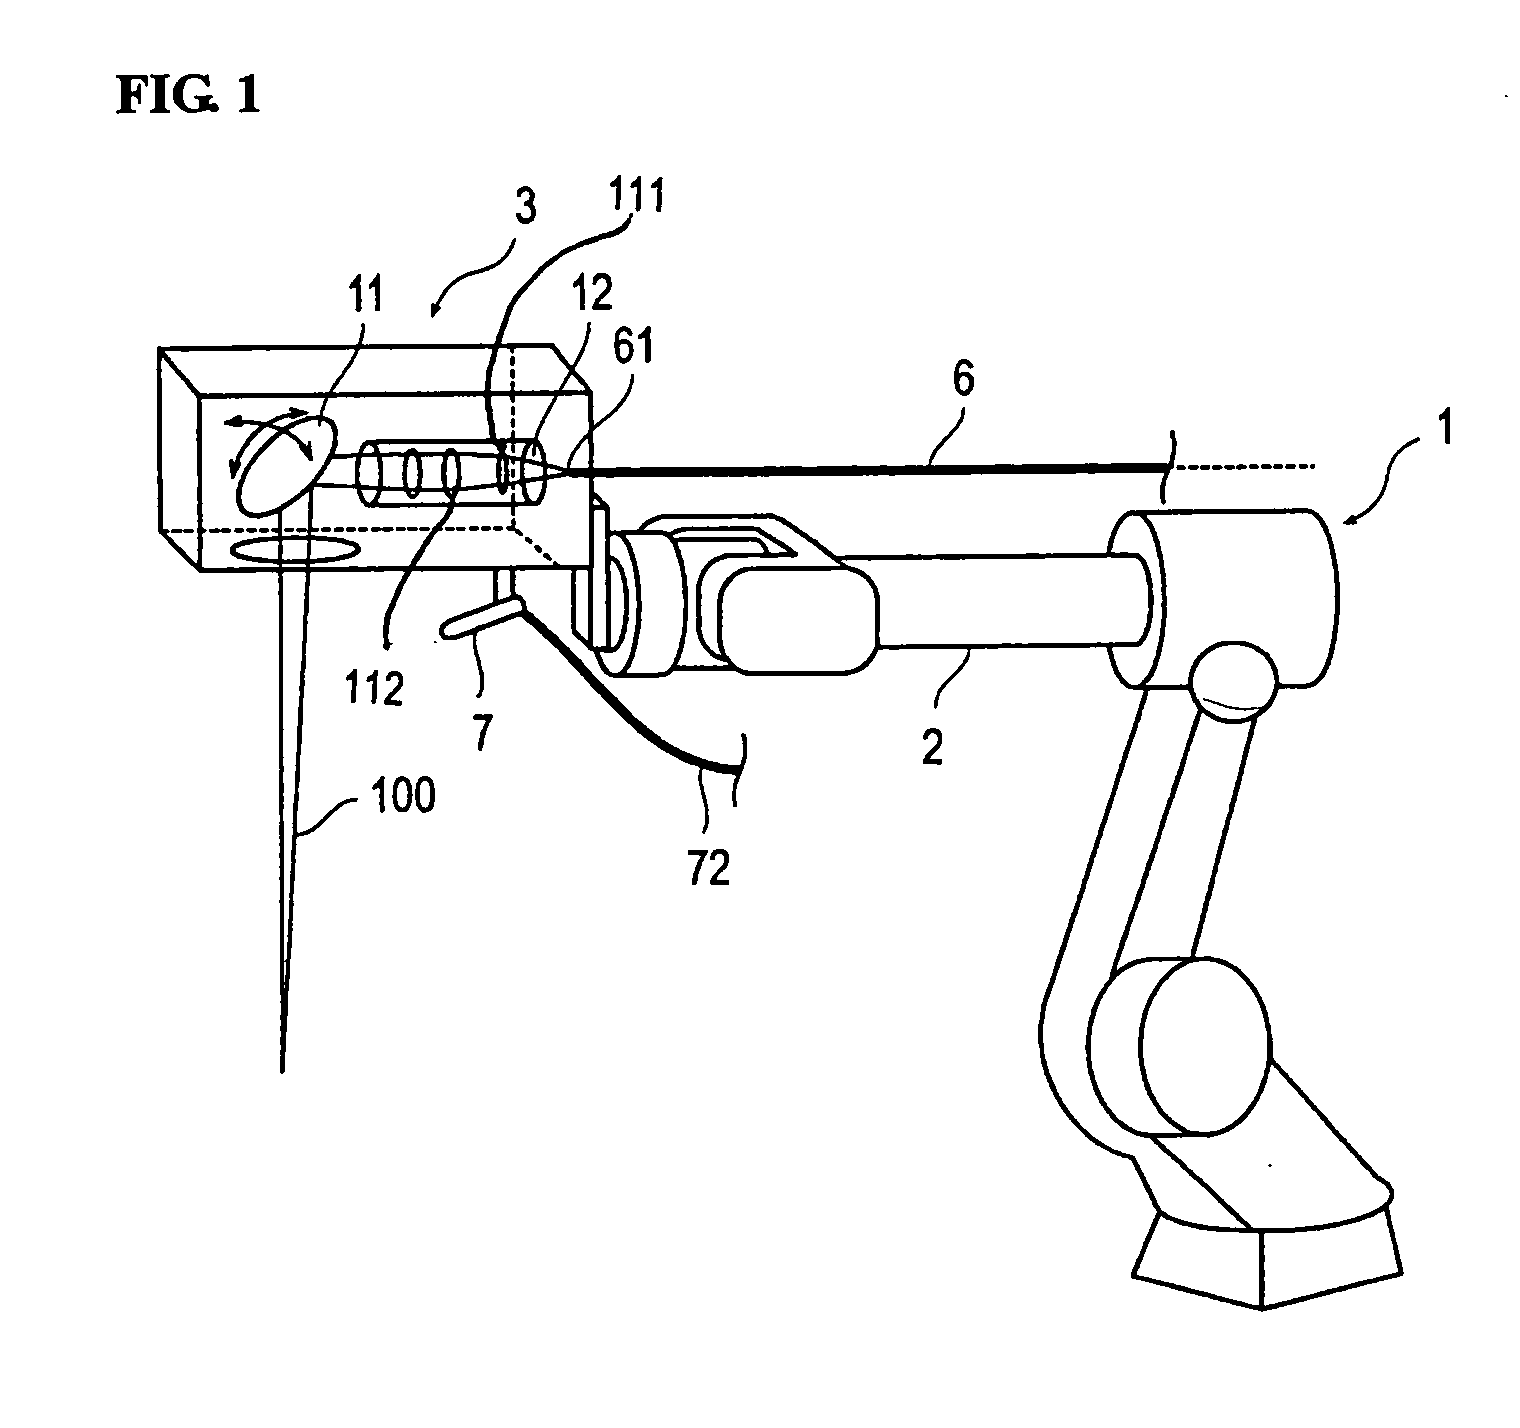 Apparatus and method for laser welding